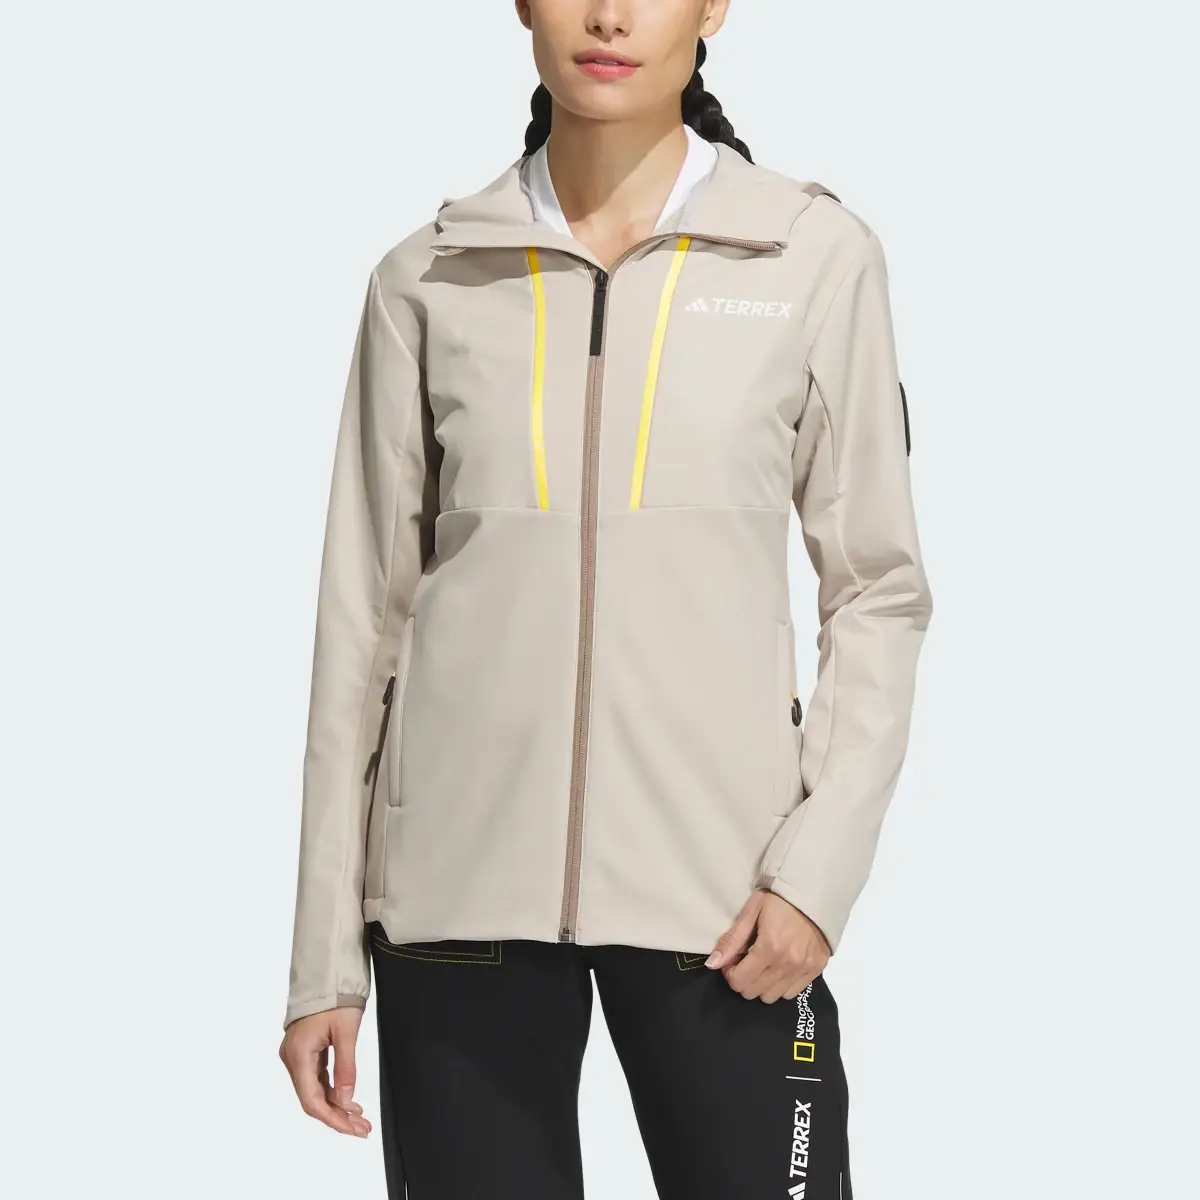 Adidas Veste soft shell National Geographic. 1